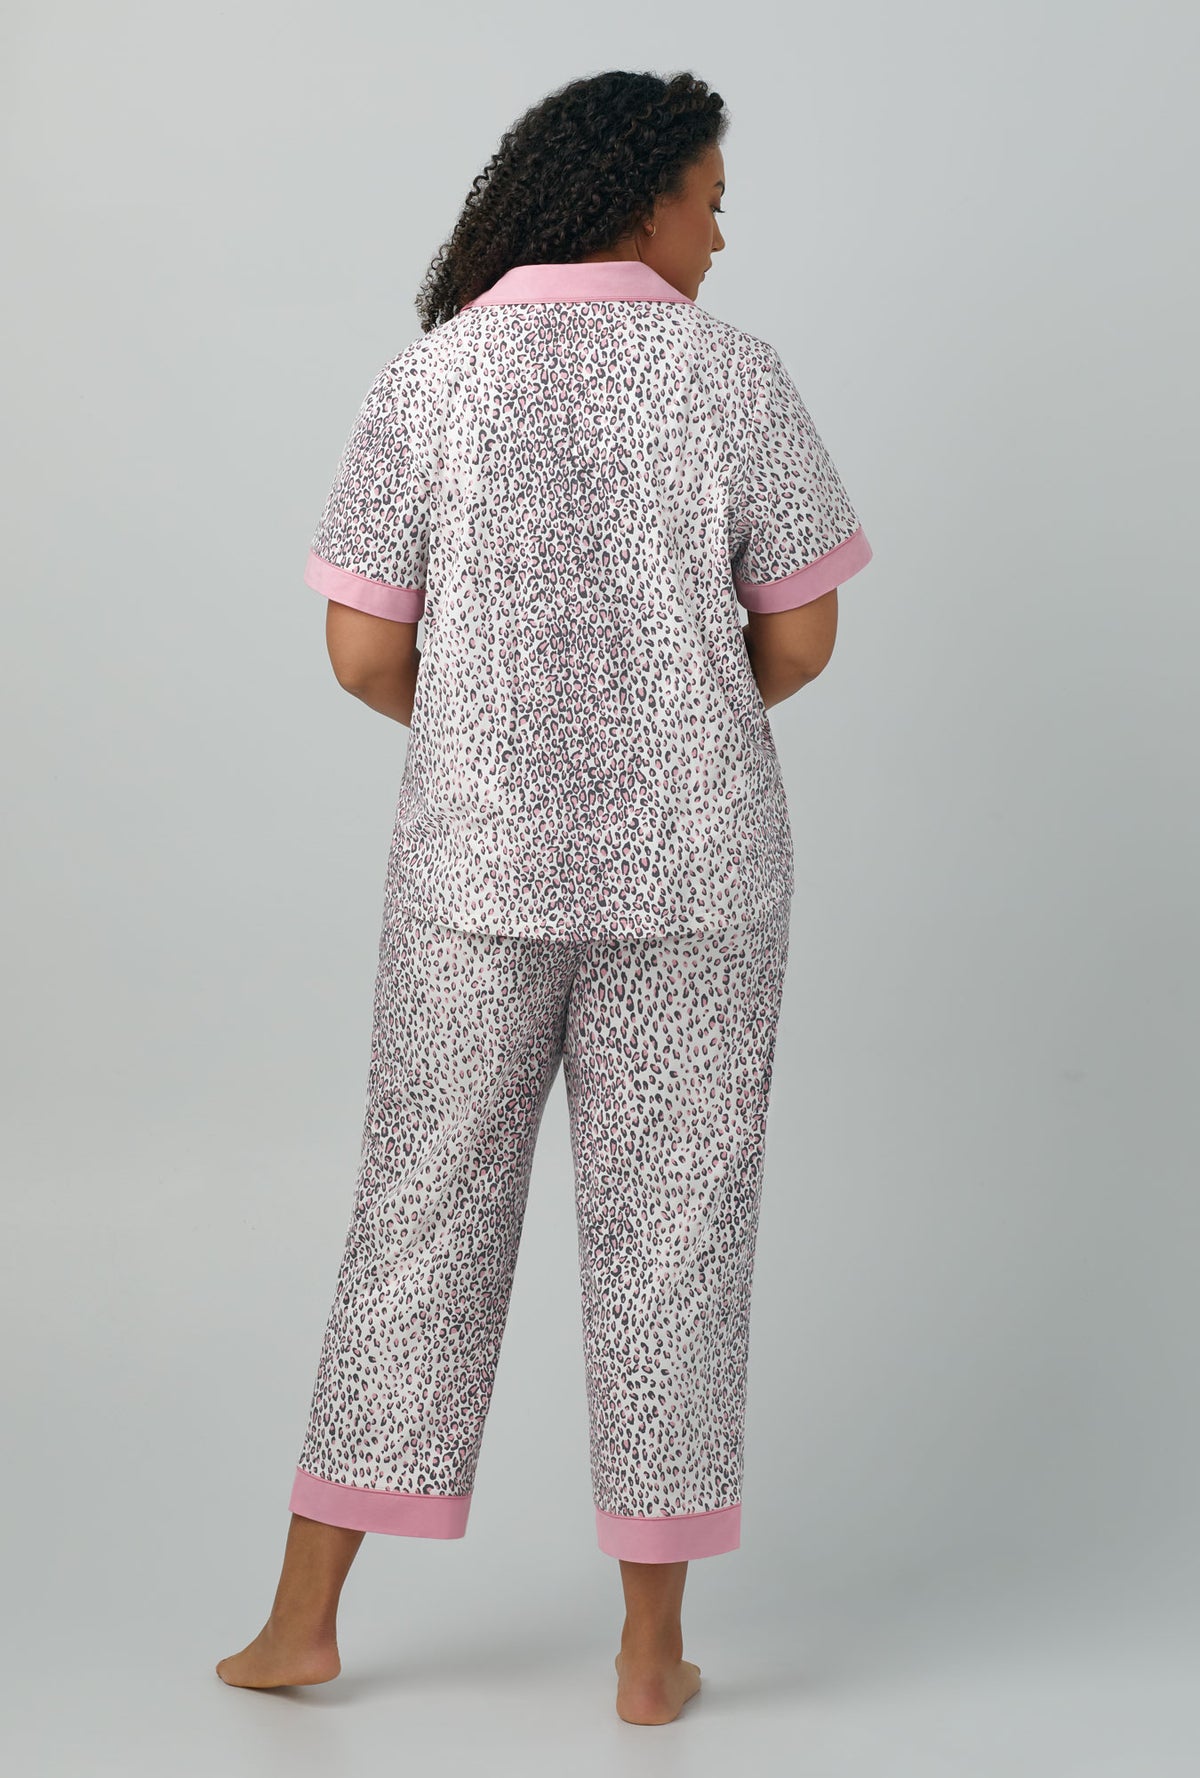 A lady wearing Short Sleeve Classic Stretch Jersey Cropped PJ Set with spa kitten print